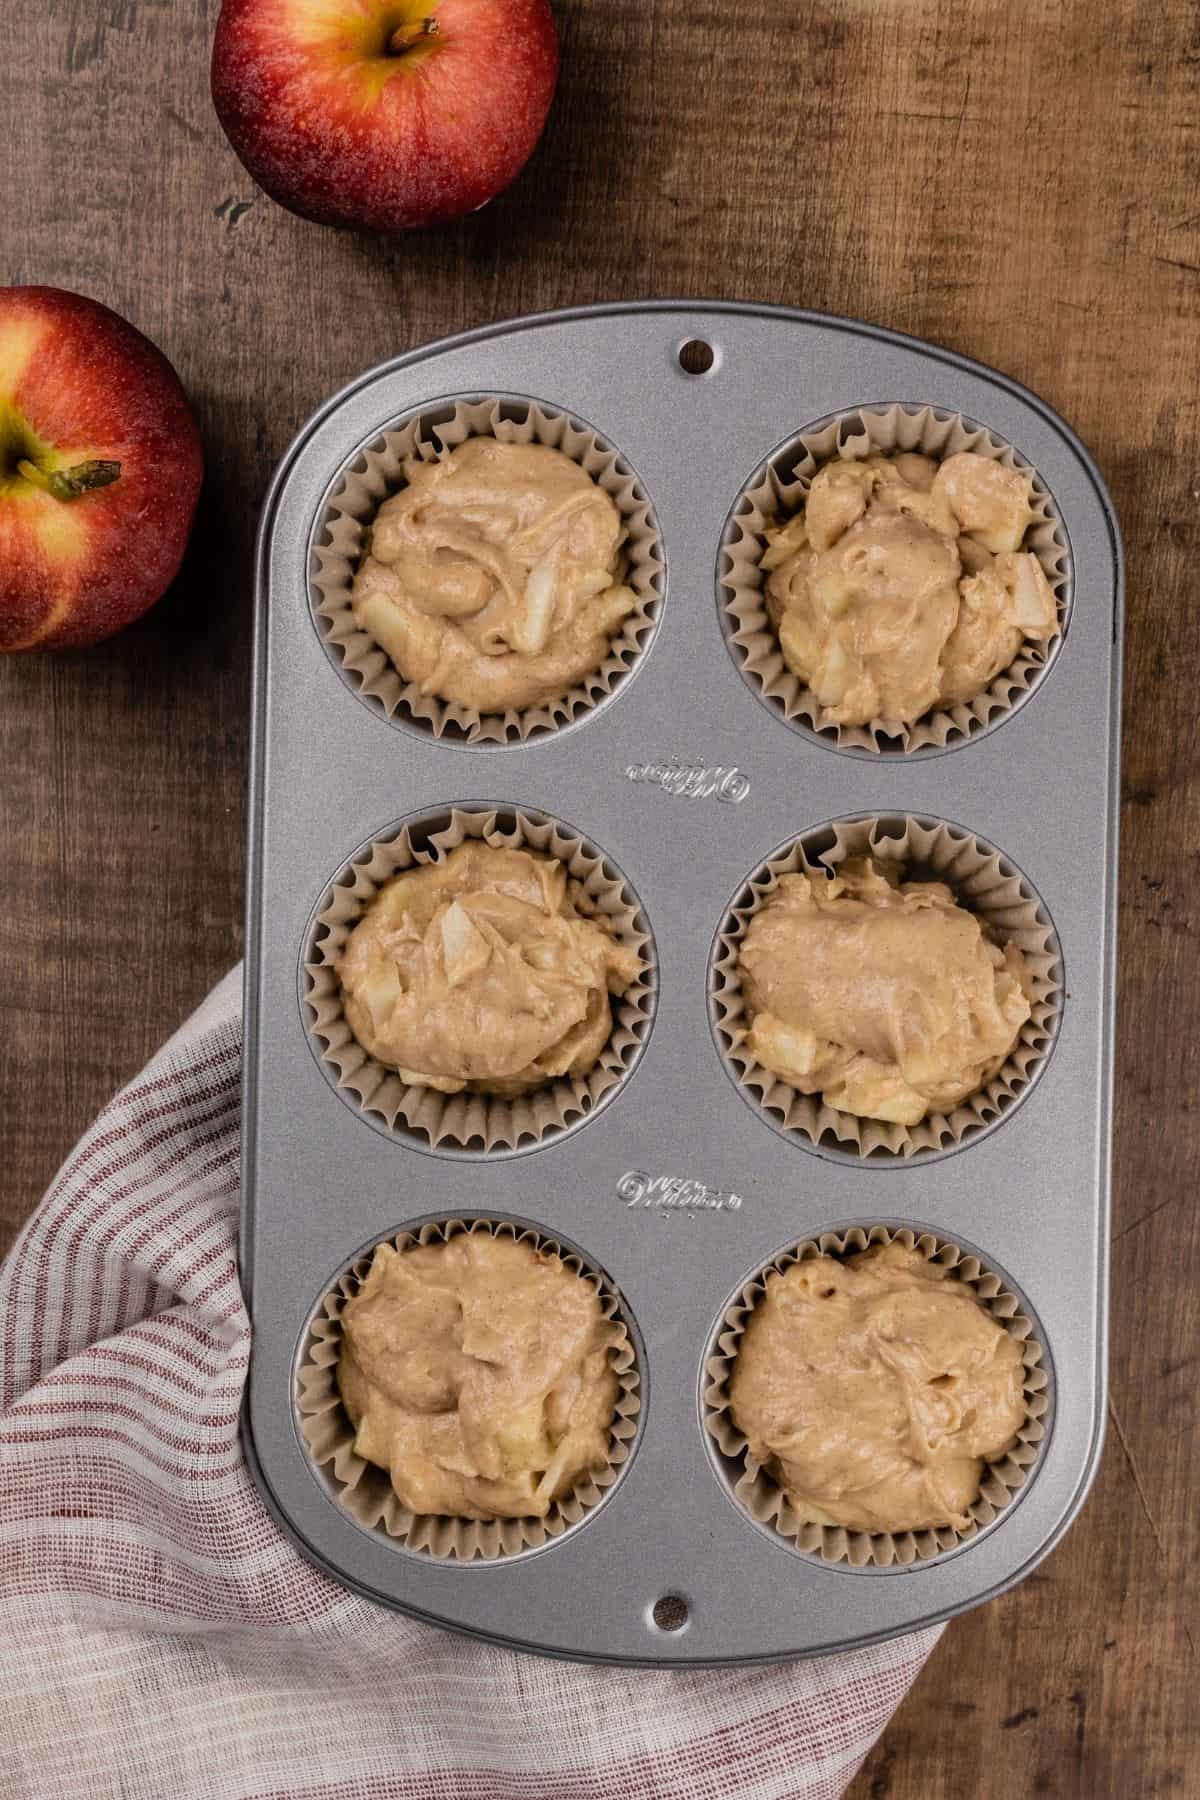 filled 6 muffin tray with the raw apple cinnamon muffin batter. a red and white stripe towel is under the tray. two apples are next to the tray.